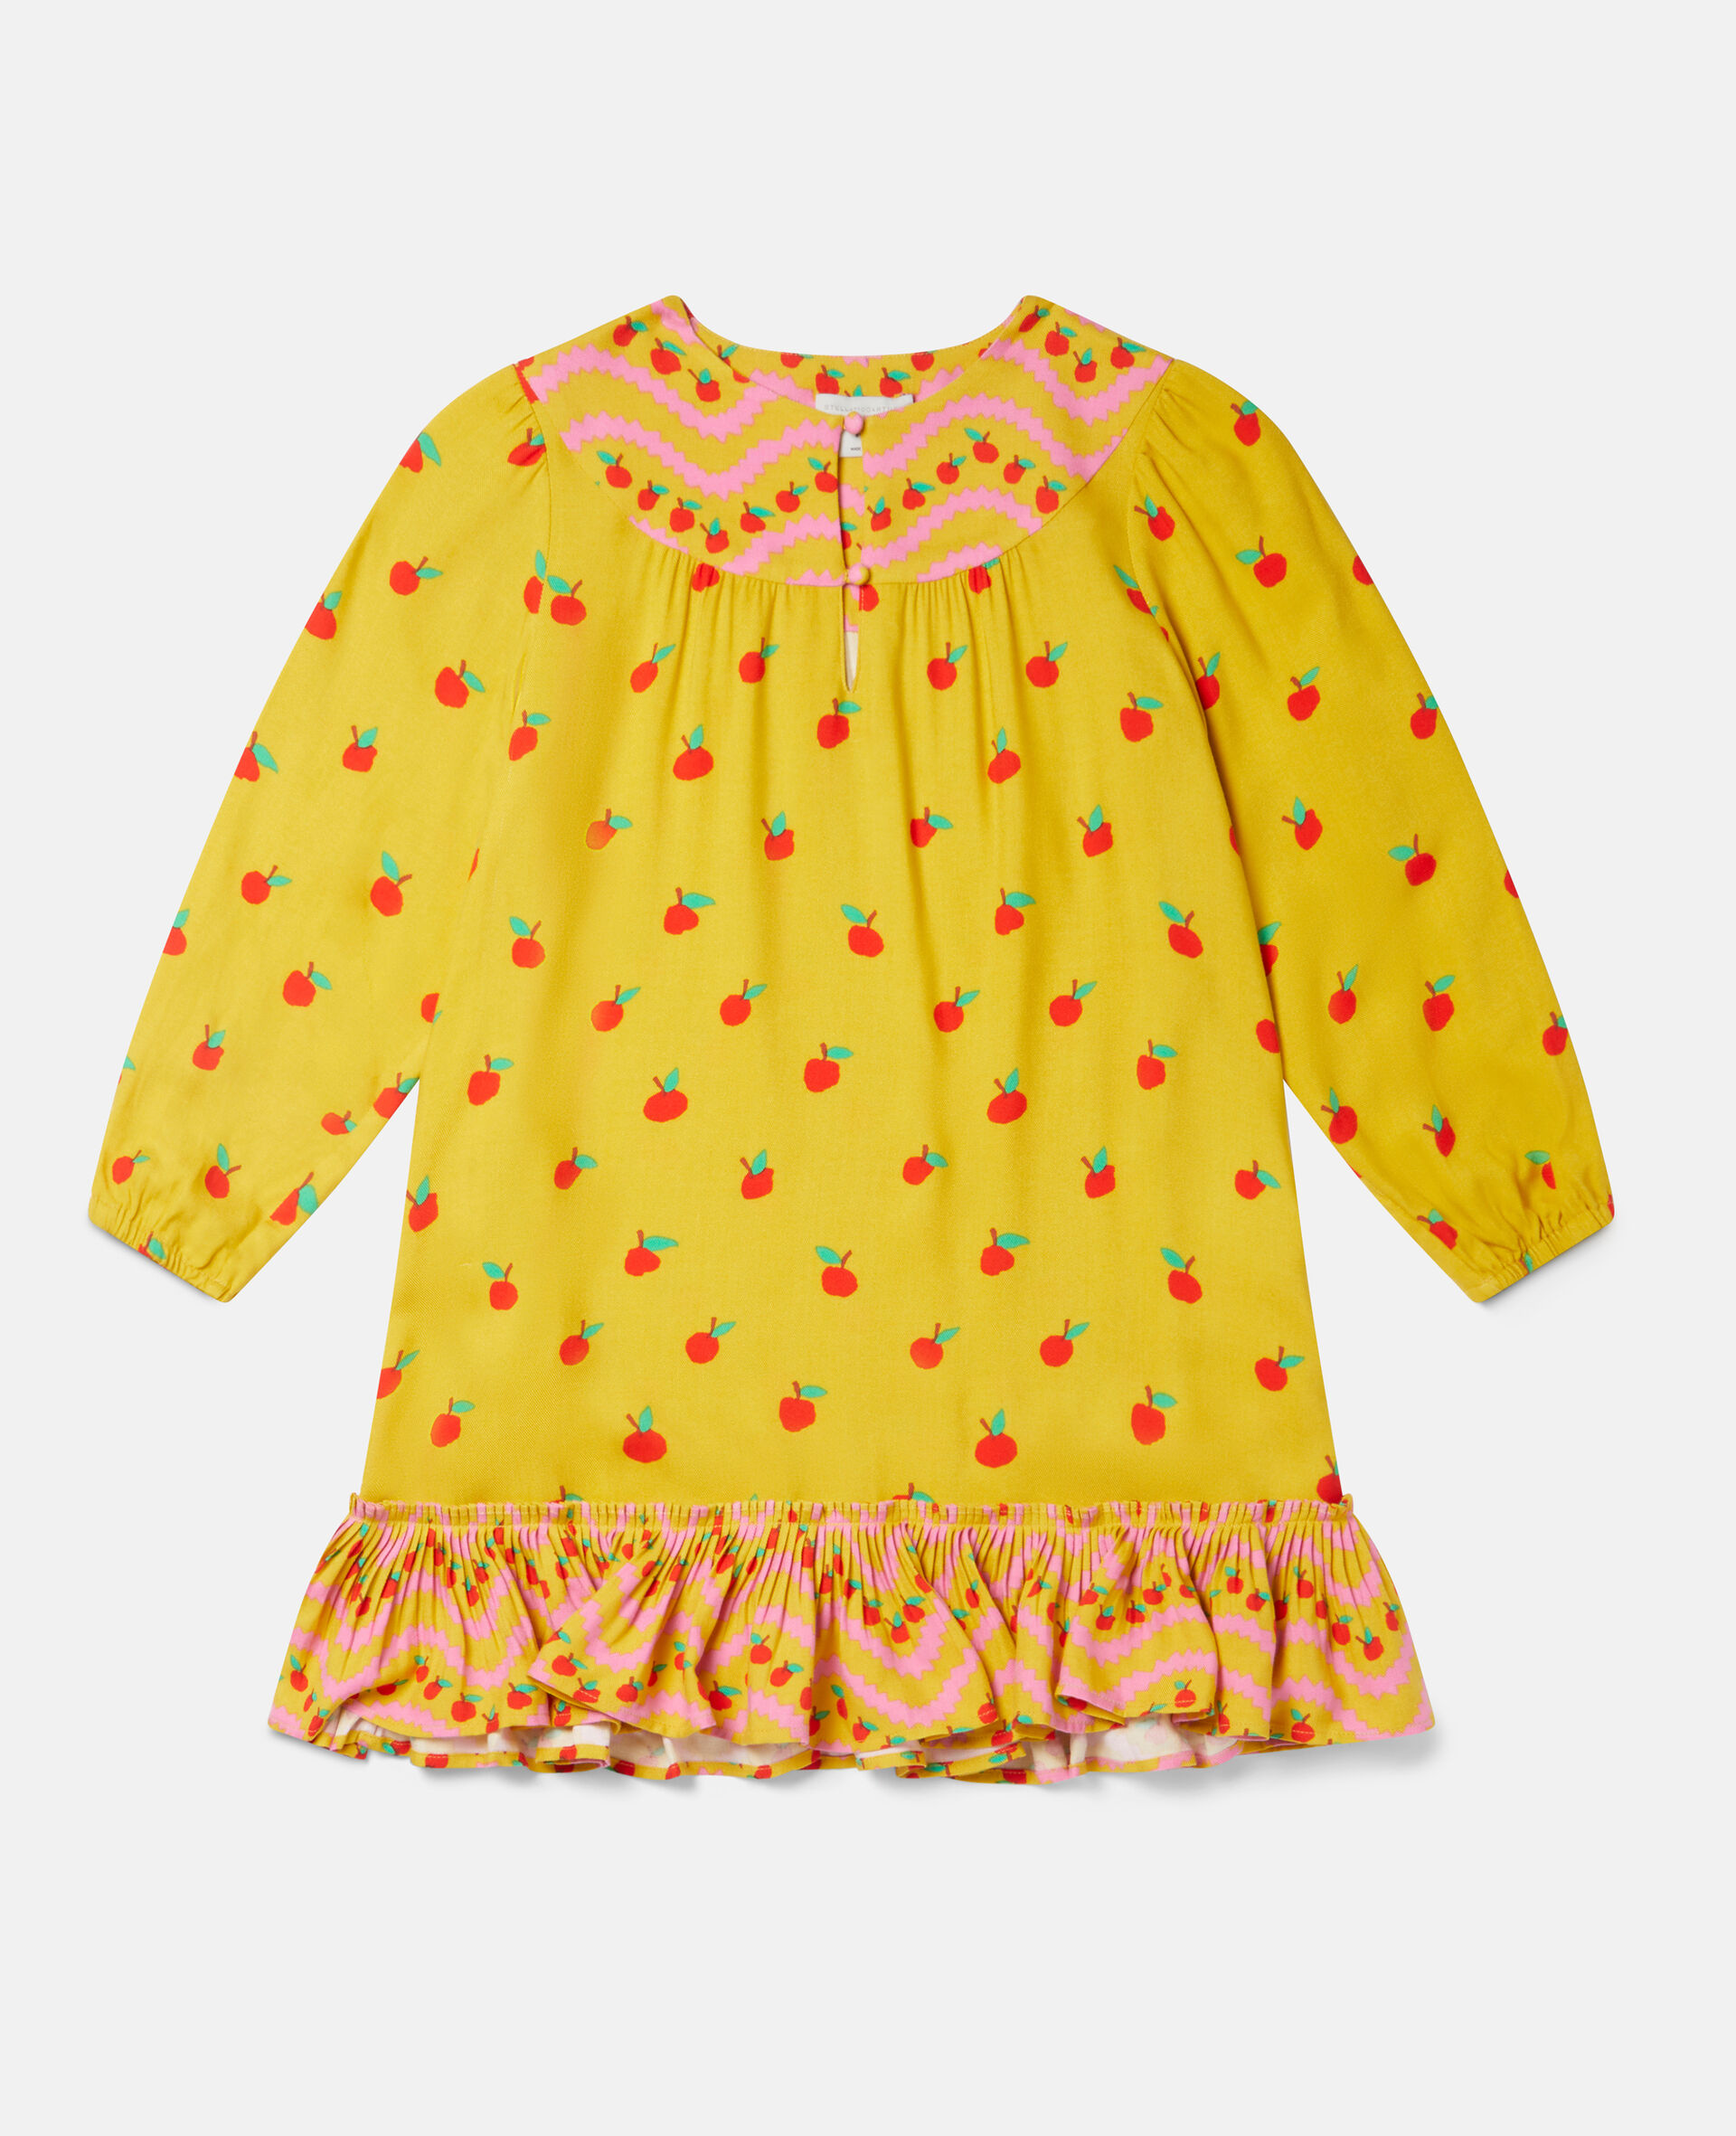 Apple Print Twill Dress-Yellow-large image number 3